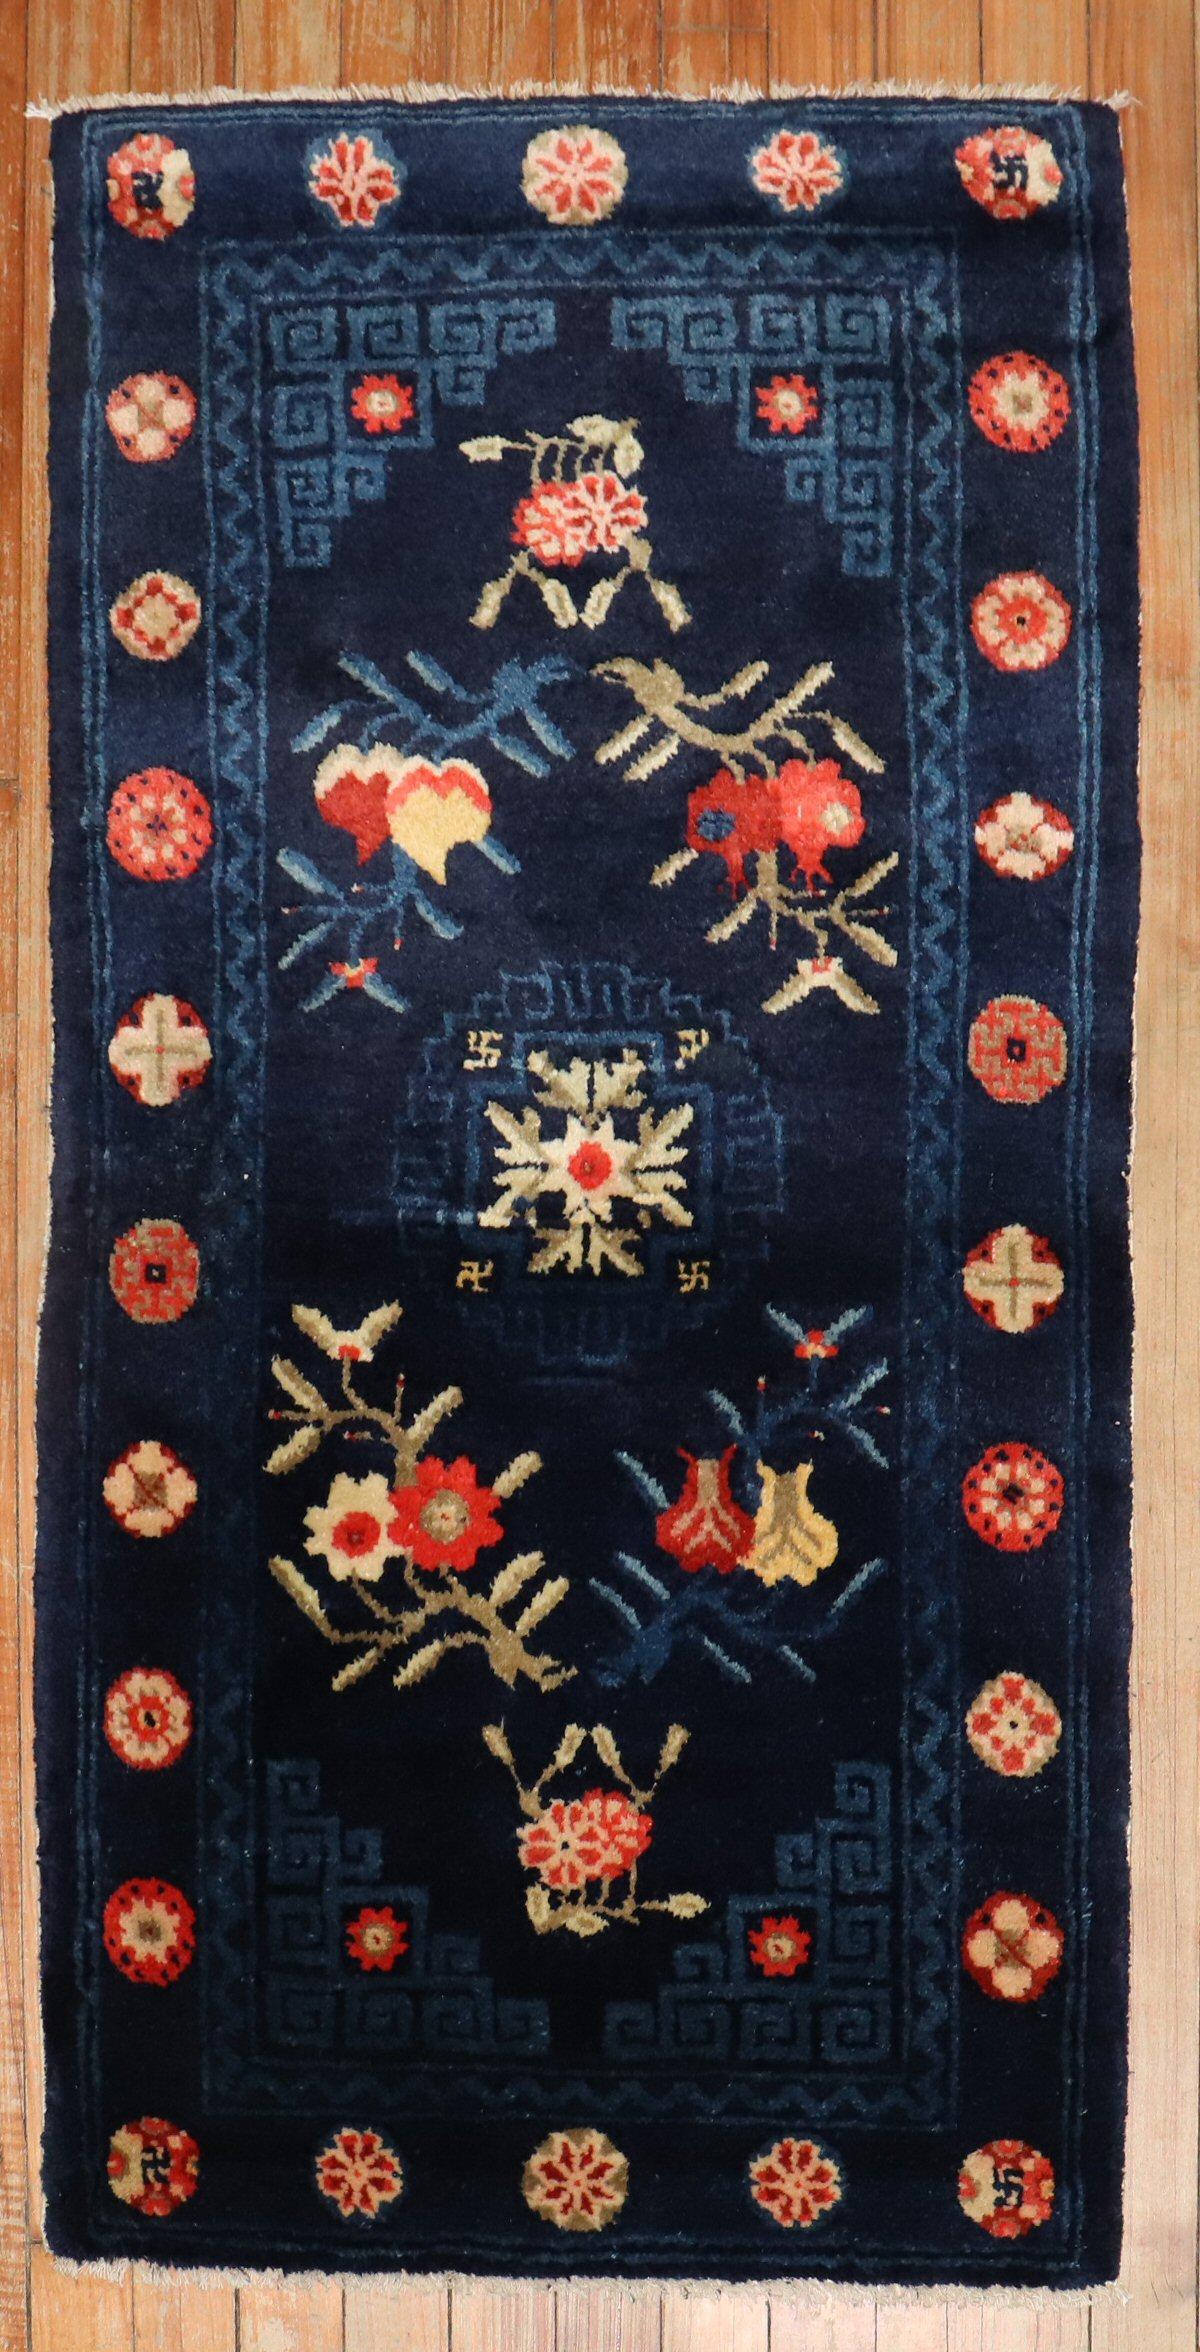 Scatter size Chinese Peking rug from the 2nd quarter of the 20th century.

Measures: 1'11